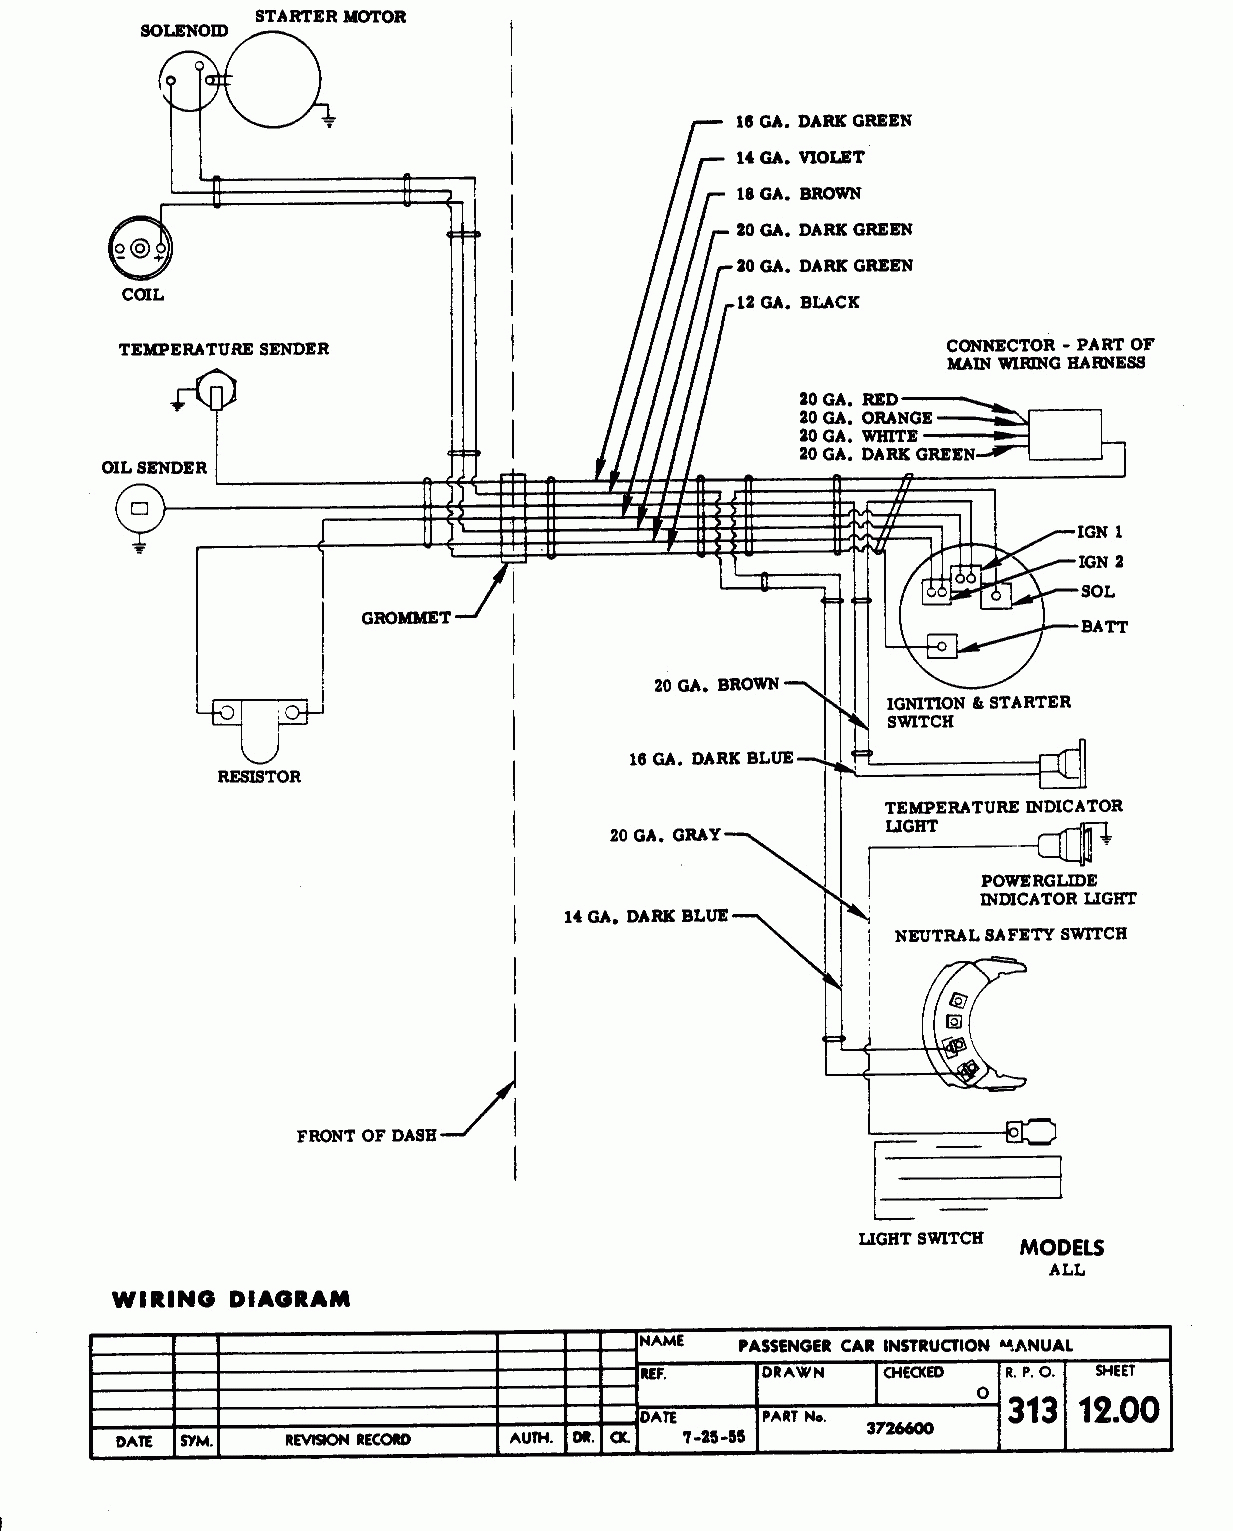 Inspirational 3 Position Ignition Switch Wiring Diagram 10 7 - 3 Position Ignition Switch Wiring Diagram